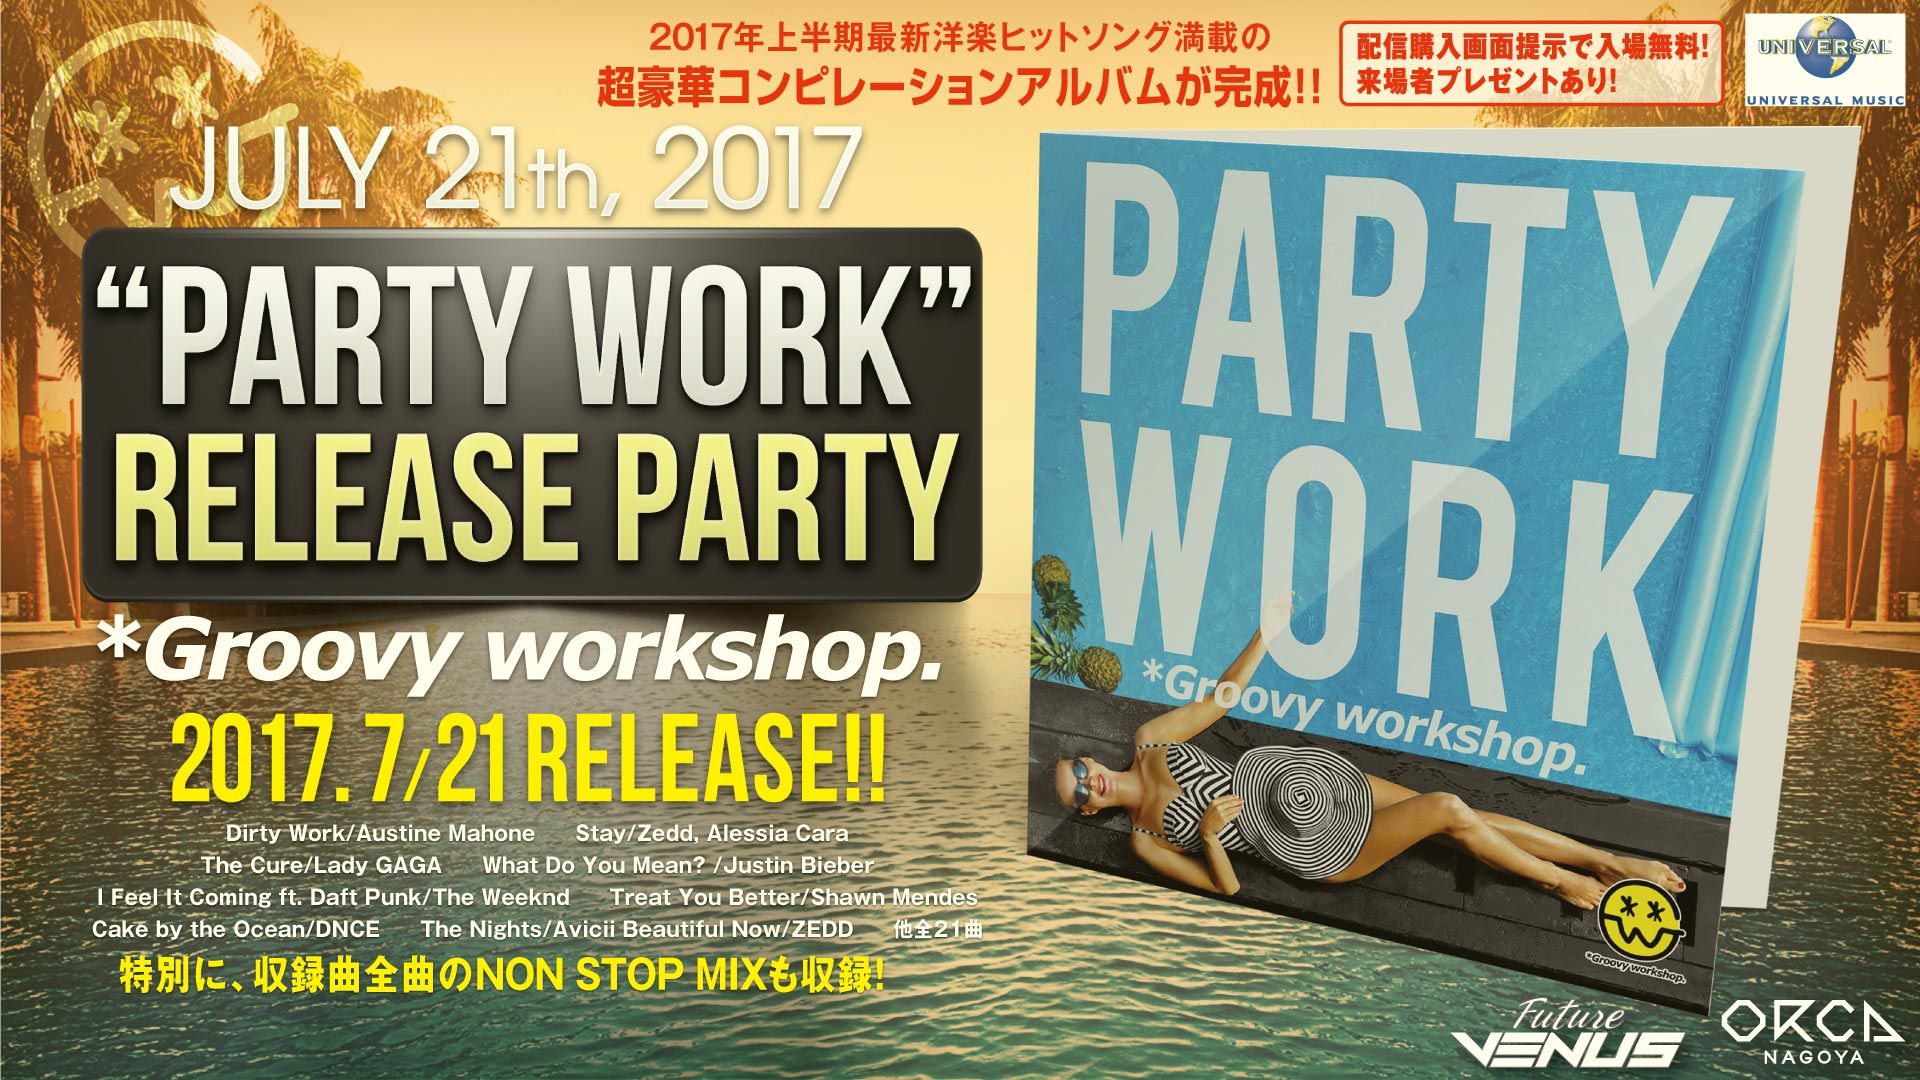 PARTY WORK – RELASE PARTY – / 『 FUTURE VENUS 』